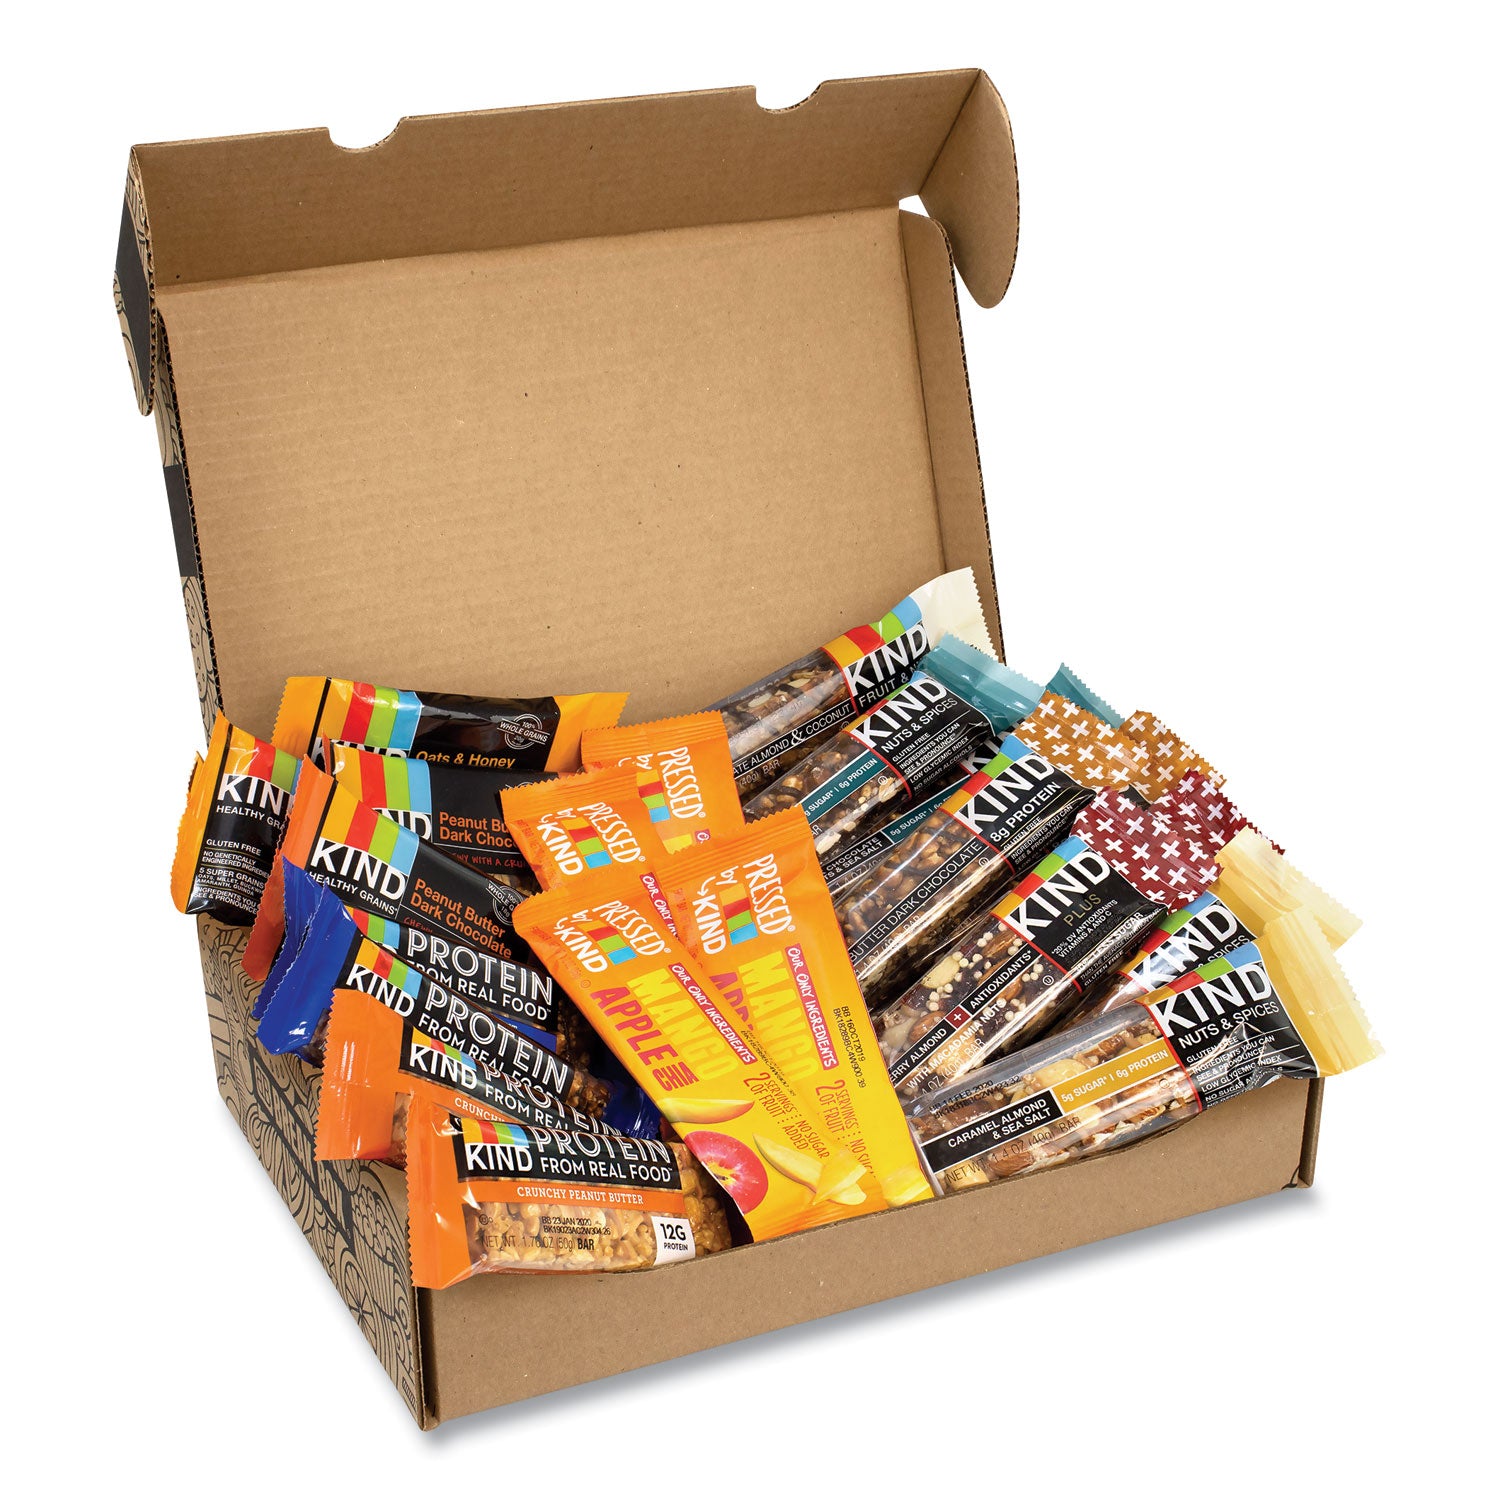 favorites-snack-box-assorted-variety-of-kind-bars-25-lb-box-22-bars-box-ships-in-1-3-business-days_grr700s0021 - 1